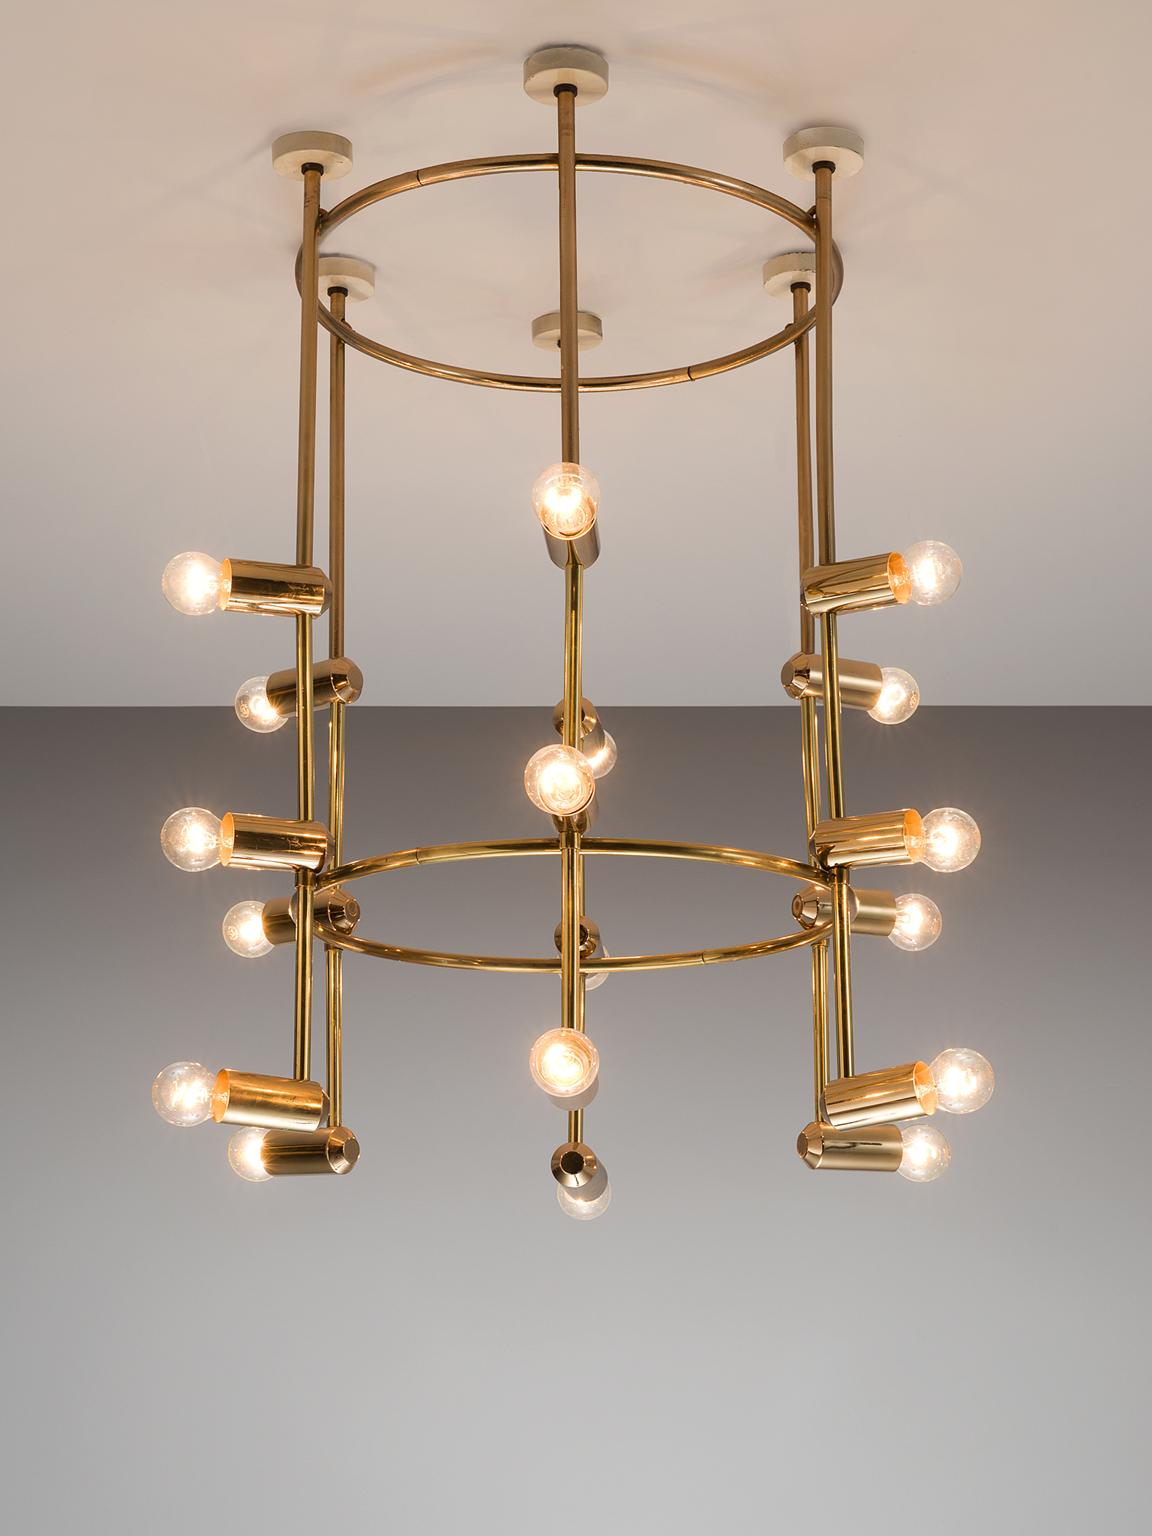 Chandelier, brass, 1960s, Switzerland.

This large yet delicate chandelier is Minimalist yet warm. The light consists of six brass stalks that are attached to a brass ring. There is a lower brass ring on the bottom giving the chandelier both